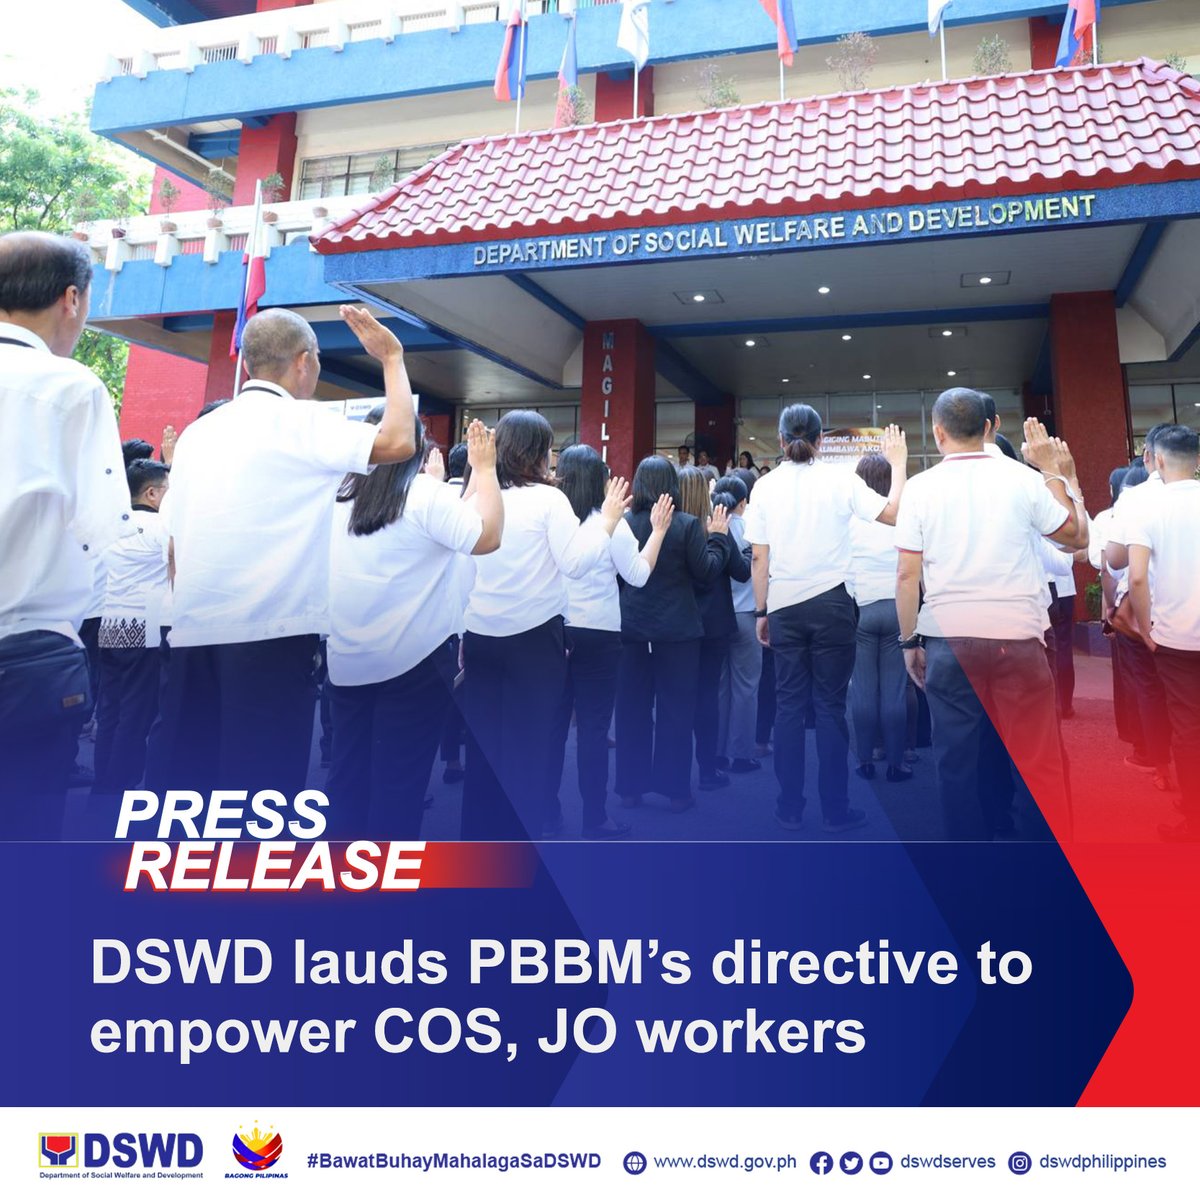 𝗗𝗦𝗪𝗗 𝗣𝗥𝗘𝗦𝗦 𝗥𝗘𝗟𝗘𝗔𝗦𝗘: DSWD lauds PBBM’s directive to empower COS, JO workers The Department of Social Welfare and Development (DSWD) has lauded the recent directive from President Ferdinand R. Marcos Jr. to enhance the opportunities for Contract of Service (COS)